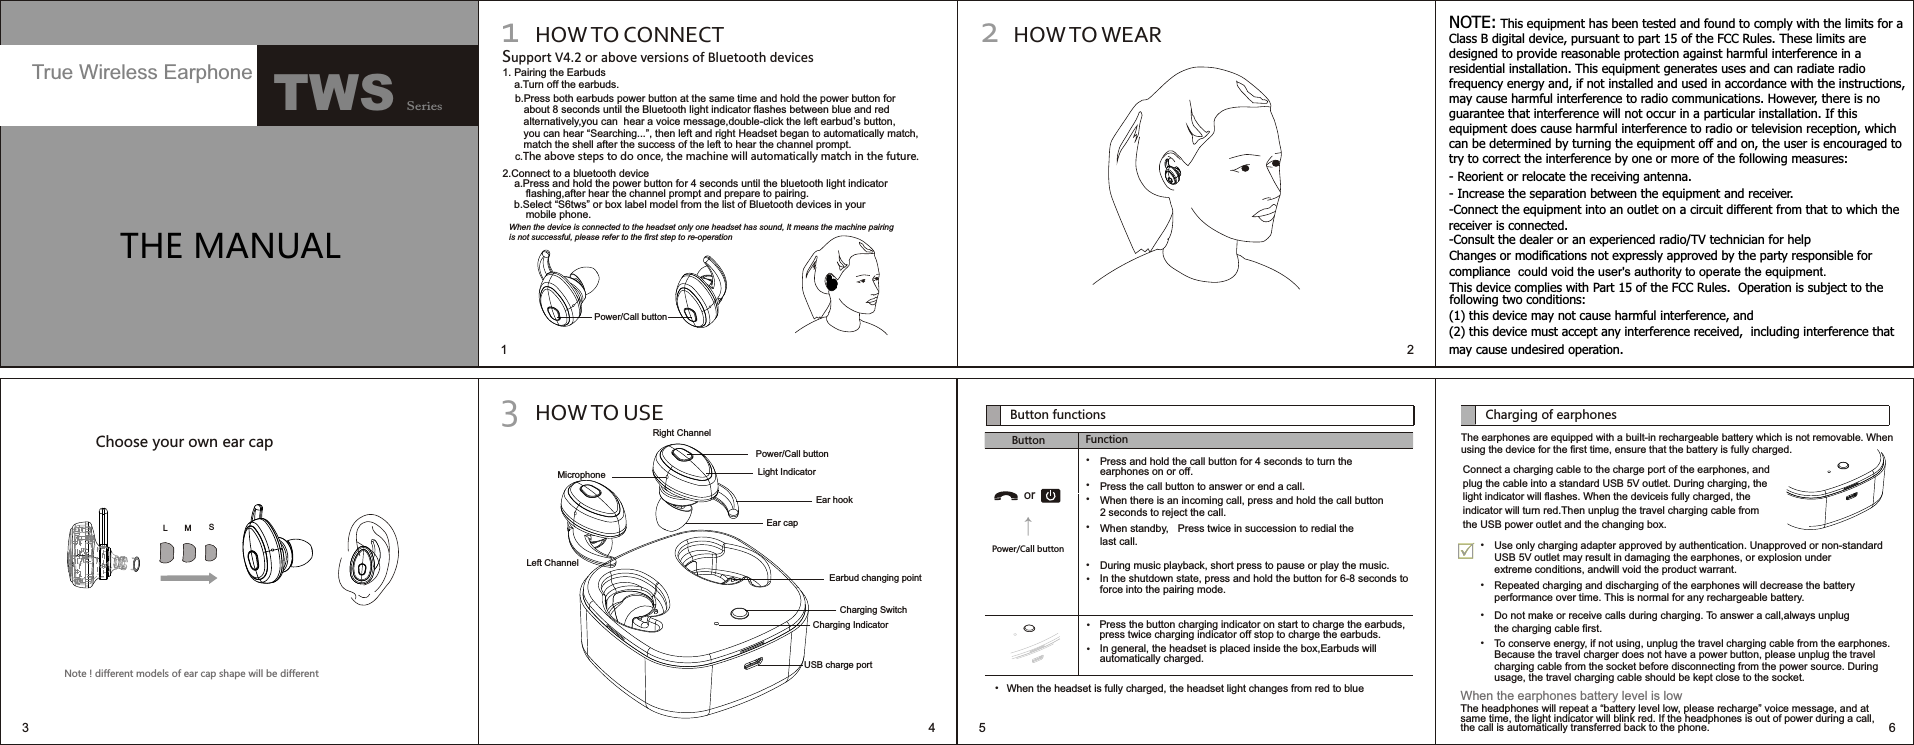 1THE MANUAL2HOW TO WEARLight Indicator 1HOW TO CONNECTb.Press both earbuds power button at the same time and hold the power button for    about 8 seconds until the Bluetooth light indicator flashes between blue and red    alternatively,you can  hear a voice message,double-click the left earbud&apos;s button,    you can hear “Searching...”, then left and right Headset began to automatically match,    match the shell after the success of the left to hear the channel prompt.c.The above steps to do once, the machine will automatically match in the future.2.Connect to a bluetooth device    a.Press and hold the power button for 4 seconds until the bluetooth light indicator         flashing,after hear the channel prompt and prepare to pairing.    b.Select “S6tws” or box label model from the list of Bluetooth devices in your         mobile phone.Support V4.2 or above versions of Bluetooth devices1. Pairing the Earbuds    a.Turn off the earbuds.4 53HOW TO USEPower/Call buttonPower/Call buttonLeft ChannelRight ChannelMicrophoneEar capEarbud changing pointCharging SwitchCharging IndicatorEar hookUSB charge portCharging of earphonesThe earphones are equipped with a built-in rechargeable battery which is not removable. When using the device for the first time, ensure that the battery is fully charged.Connect a charging cable to the charge port of the earphones, and plug the cable into a standard USB 5V outlet. During charging, the light indicator will flashes. When the deviceis fully charged, the indicator will turn red.Then unplug the travel charging cable from the USB power outlet and the changing box.Use only charging adapter approved by authentication. Unapproved or non-standard USB 5V outlet may result in damaging the earphones, or explosion under extreme conditions, andwill void the product warrant.• When the earphones battery level is lowThe headphones will repeat a “battery level low, please recharge” voice message, and at same time, the light indicator will blink red. If the headphones is out of power during a call, the call is automatically transferred back to the phone.Repeated charging and discharging of the earphones will decrease the battery performance over time. This is normal for any rechargeable battery.• Do not make or receive calls during charging. To answer a call,always unplug the charging cable first.• To conserve energy, if not using, unplug the travel charging cable from the earphones. Because the travel charger does not have a power button, please unplug the travel charging cable from the socket before disconnecting from the power source. During usage, the travel charging cable should be kept close to the socket.• 23 6SeriesTrue Wireless Earphone  Button functions Press and hold the call button for 4 seconds to turn the • • • • • Press the call button to answer or end a call.During music playback, short press to pause or play the music.When there is an incoming call, press and hold the call button 2 seconds to reject the call.When standby, Button FunctionPower/Call button•  Press the button charging indicator on start to charge the earbuds,press twice charging indicator off stop to charge the earbuds.•  In general, the headset is placed inside the box,Earbuds willautomatically charged. In the shutdown state, press and hold the button for 6-8 seconds to force into the pairing mode.• ↑• When the headset is fully charged, the headset light changes from red to bluePress twice in succession to redial the last call.earphones on or off.orL M SChoose your own ear capNote ! different models of ear cap shape will be differentTWSWhen the device is connected to the headset only one headset has sound, It means the machine pairing is not successful, please refer to the ﬁrst step to re-operationNOTE: This equipment has been tested and found to comply with the limits for a Class B digital device, pursuant to part 15 of the FCC Rules. These limits are designed to provide reasonable protection against harmful interference in a residential installation. This equipment generates uses and can radiate radio frequency energy and, if not installed and used in accordance with the instructions, may cause harmful interference to radio communications. However, there is no guarantee that interference will not occur in a particular installation. If this equipment does cause harmful interference to radio or television reception, which can be determined by turning the equipment off and on, the user is encouraged to try to correct the interference by one or more of the following measures: - Reorient or relocate the receiving antenna. - Increase the separation between the equipment and receiver. -Connect the equipment into an outlet on a circuit different from that to which the receiver is connected. -Consult the dealer or an experienced radio/TV technician for help Changes or modiﬁcations not expressly approved by the party responsible for compliance  could void the user&apos;s authority to operate the equipment.This device complies with Part 15 of the FCC Rules.  Operation is subject to the following two conditions:  (1) this device may not cause harmful interference, and  (2) this device must accept any interference received,  including interference that may cause undesired operation.   